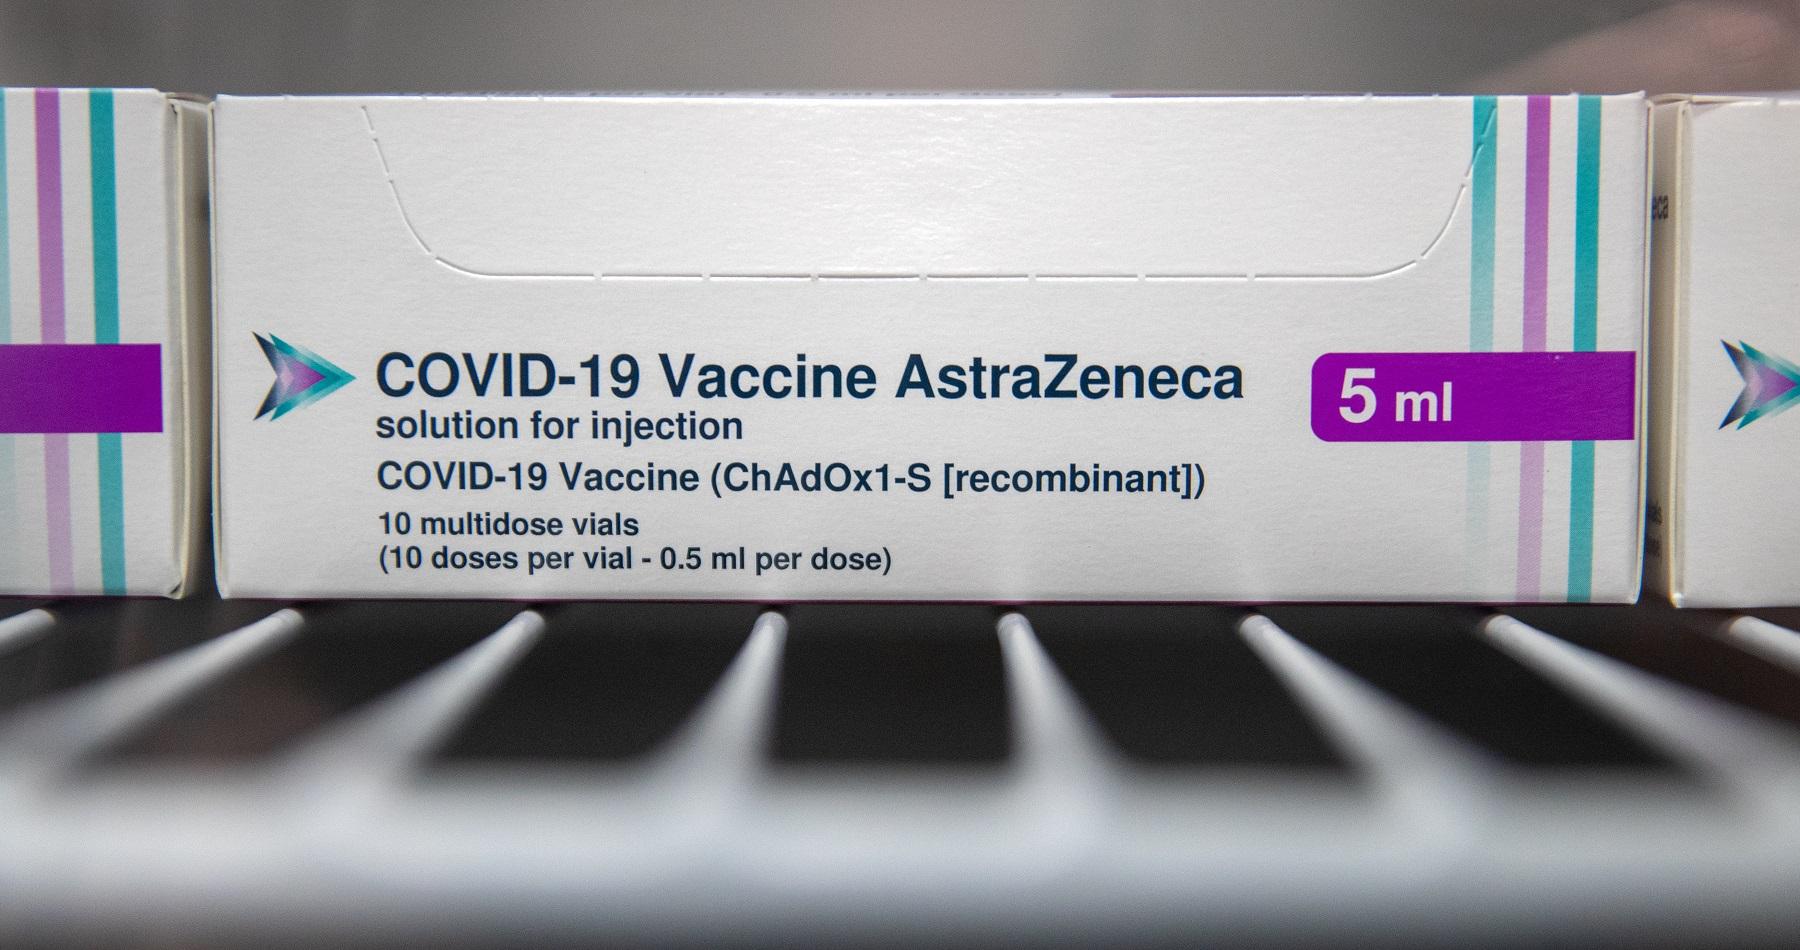 COVAX gets a shot in the arm after WHO approves AstraZeneca COVID-19 vaccine